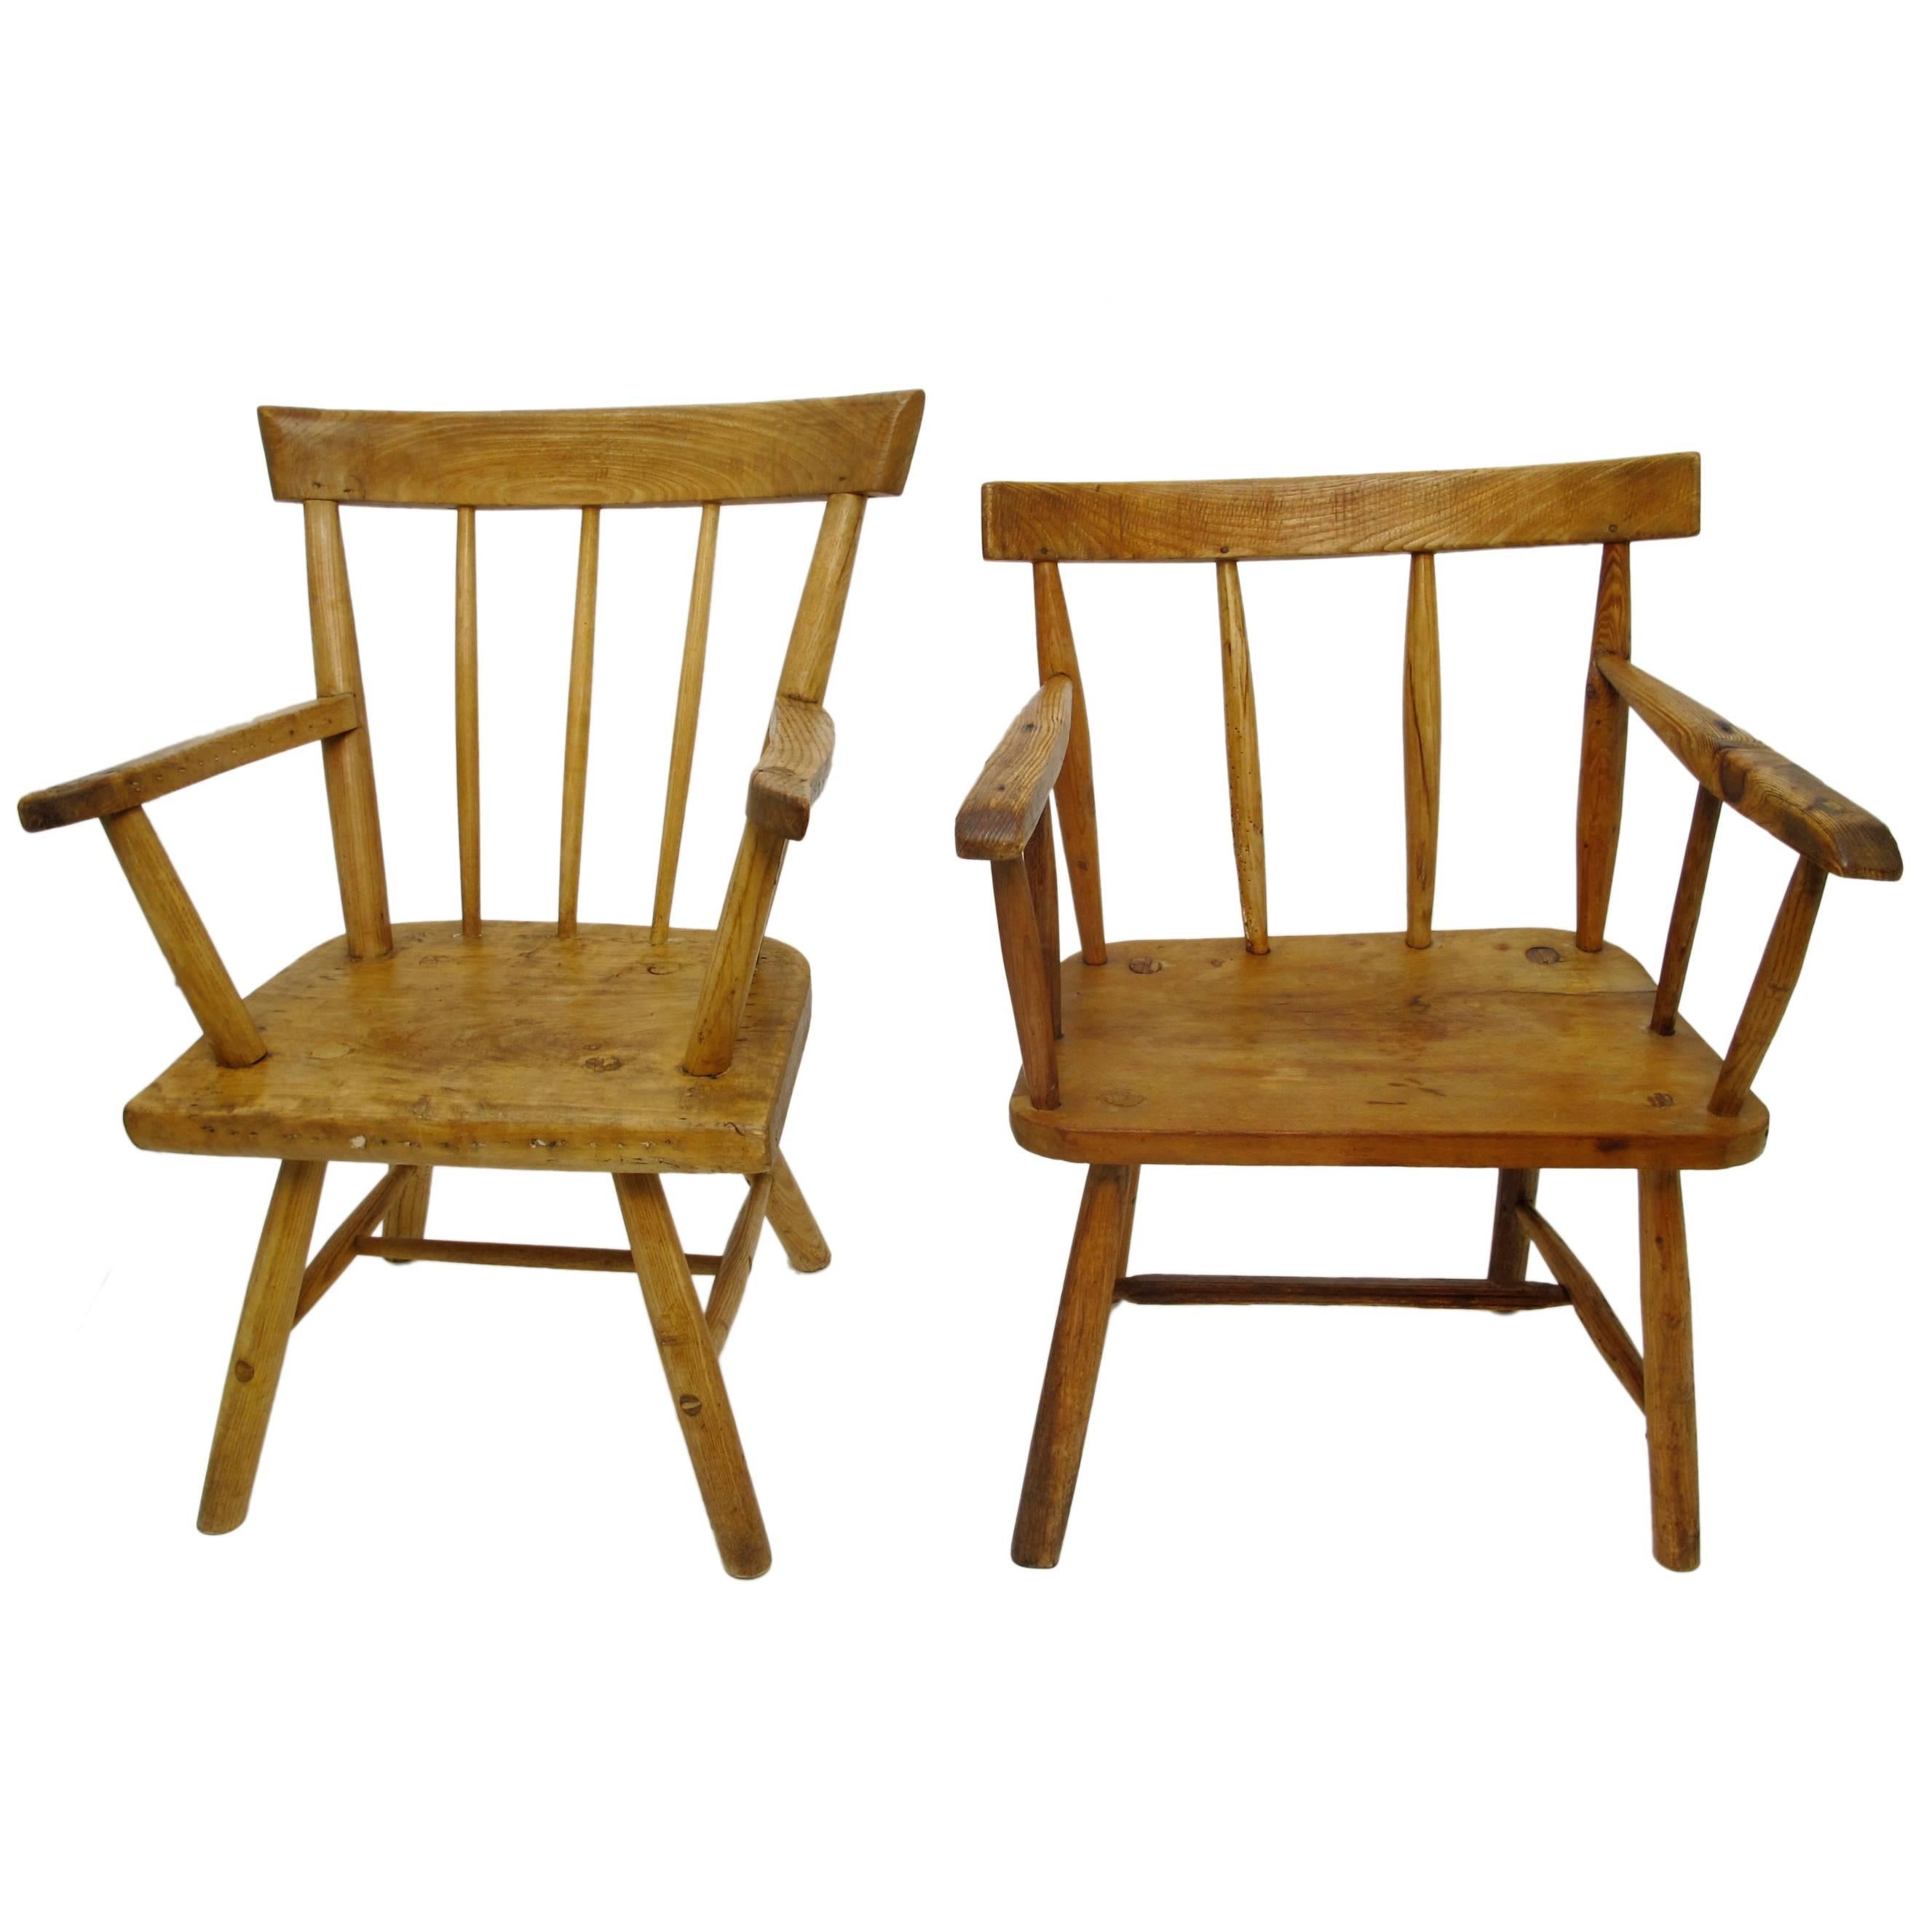 Two Rustic Pine Armchairs, Bavarian, Late 19th Century